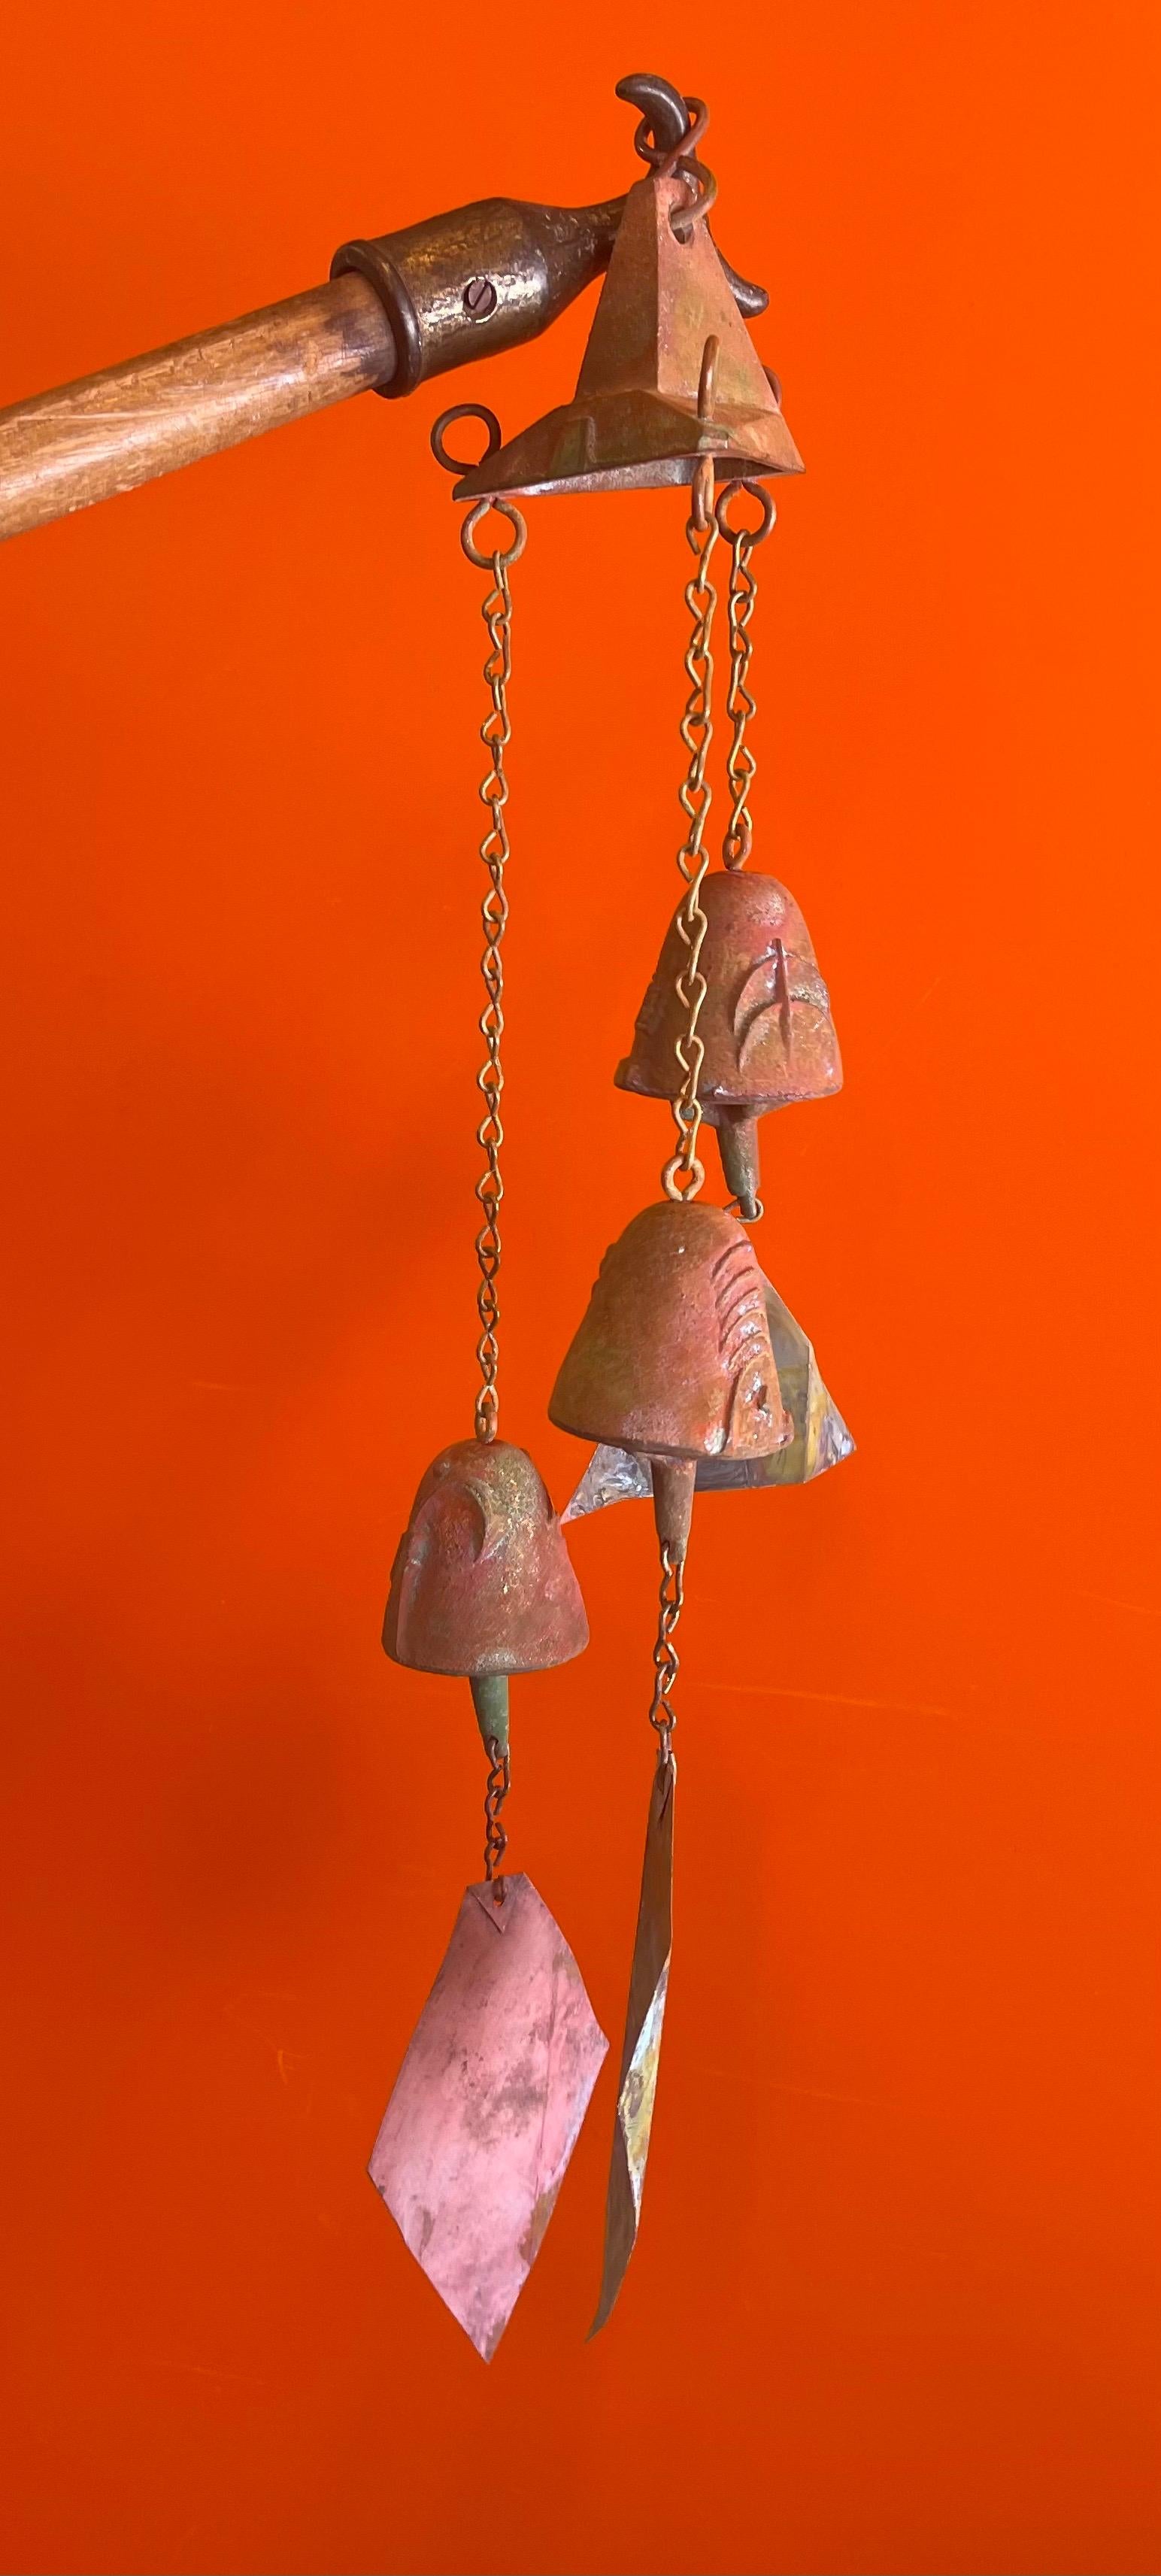 Bronze Cosanti windbell cluster with hanging bracket by Paolo Soleri, circa 1980s. The cluster combines three windbells beautifully suspended by delicate chains at different lengths from a flared funnel-shaped piece above. The bells have a stunning